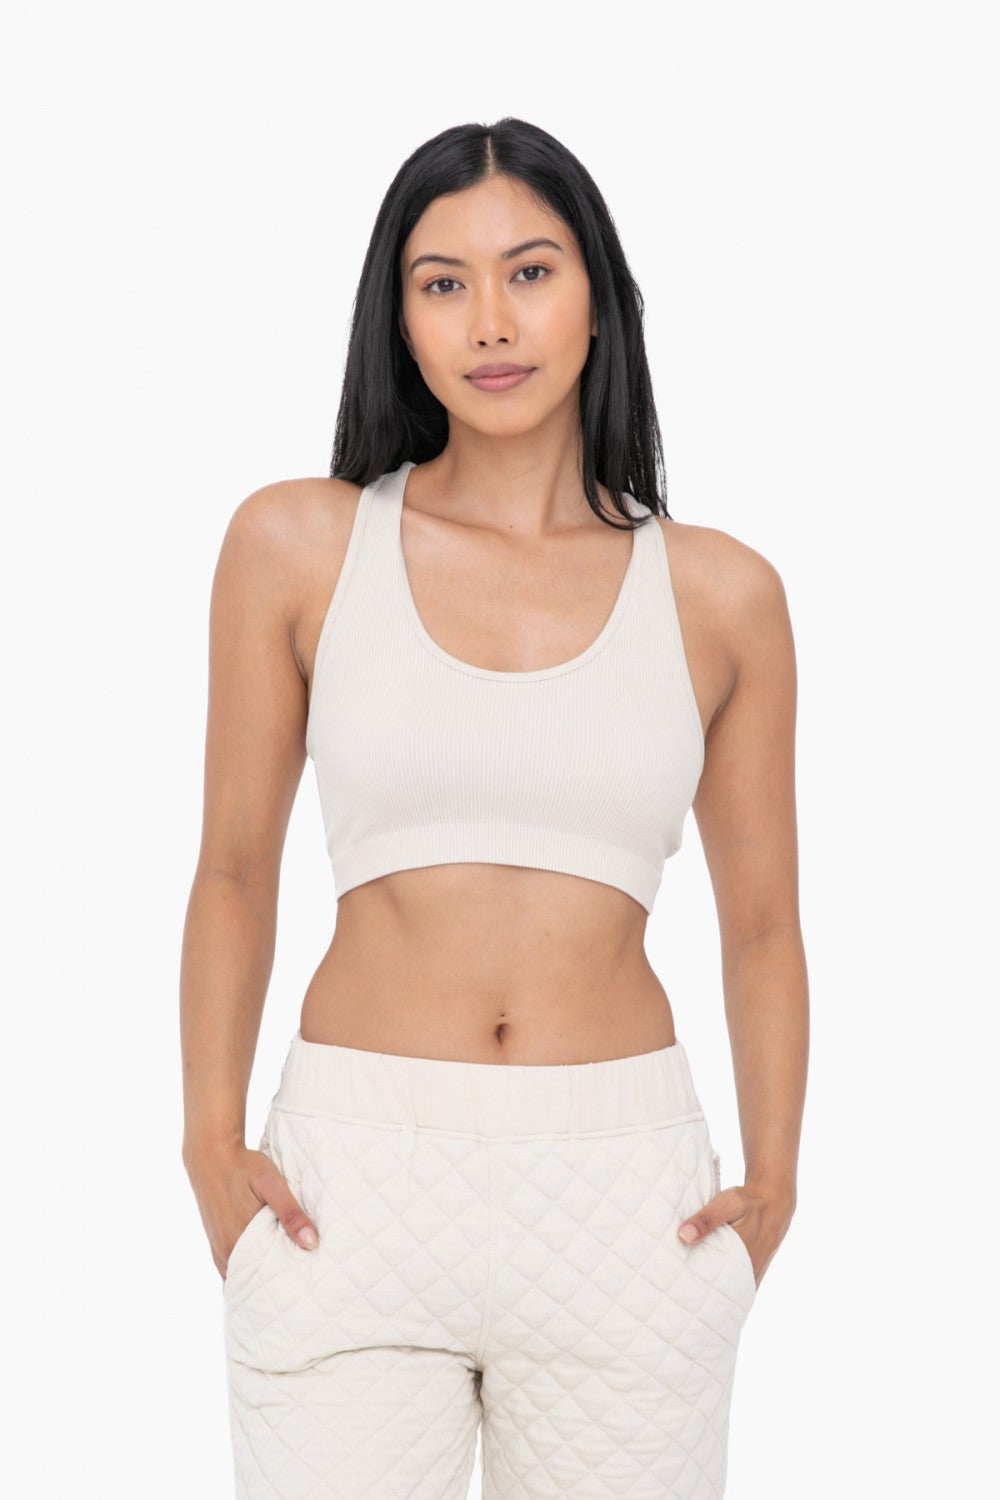 This Seamless Lounge Sports Bra offers an extra cozy fit with its ribbed and racerback design. With no pesky seams to hold you back, this lightweight bra will help you move comfortably and freely. Perfect for lounging and light exercise.      92% Polyamide, 8% Elastane,     Machine wash cold, Hang dry.